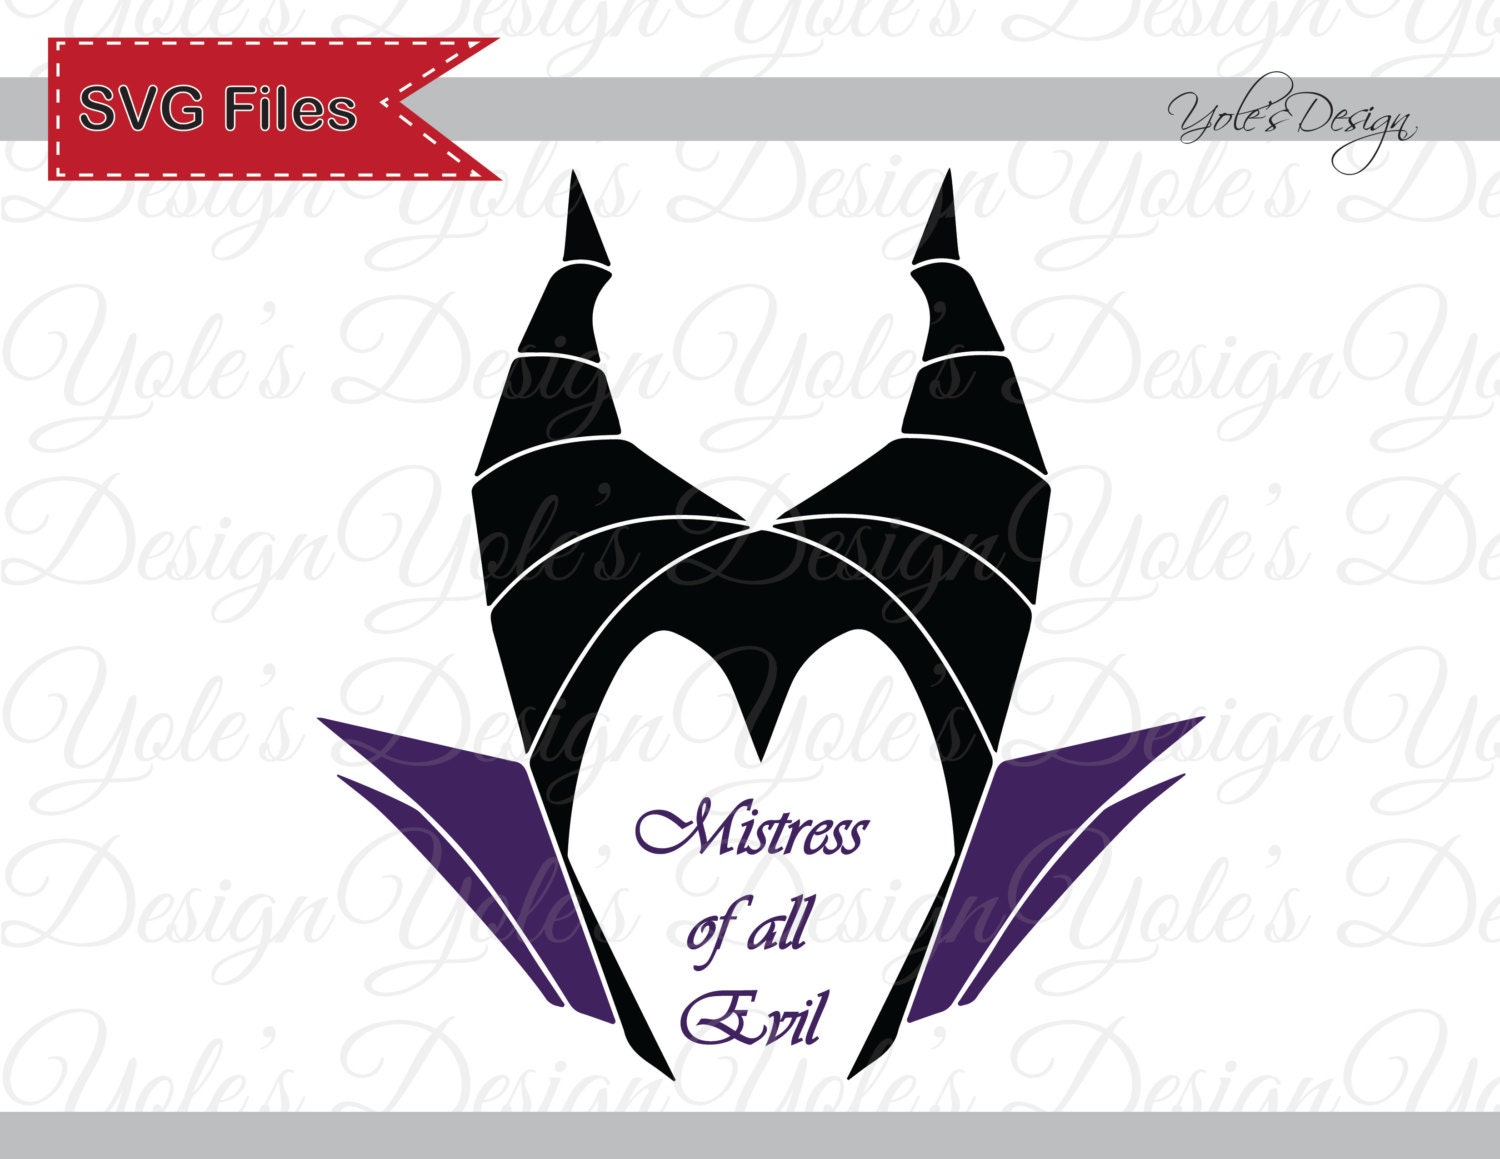 Download INSTANT DOWNLOAD Maleficent Villain SVG Inspired by YoleDesign